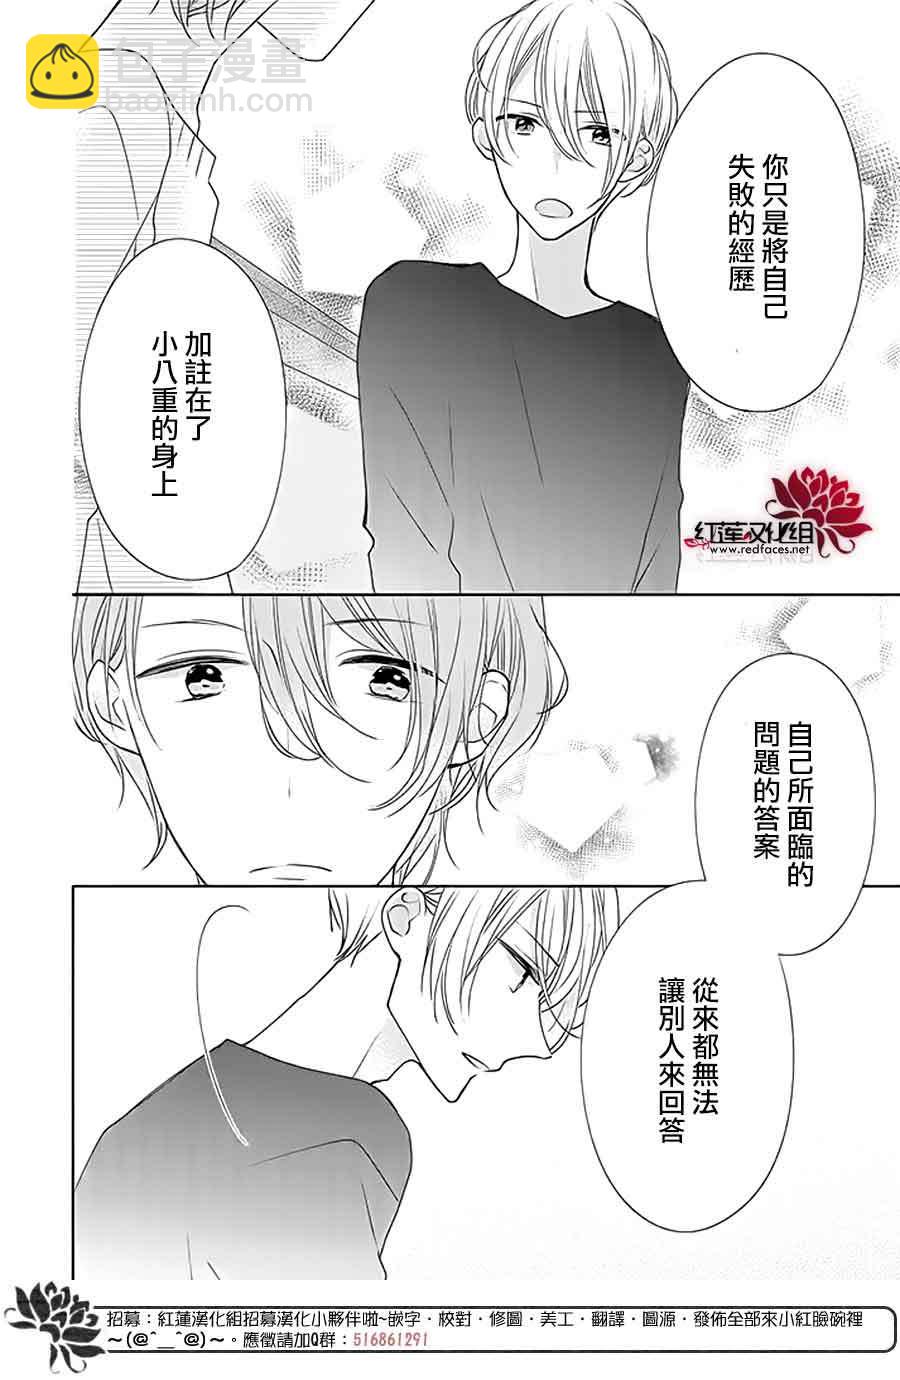 If given a second chance - 26话 - 4